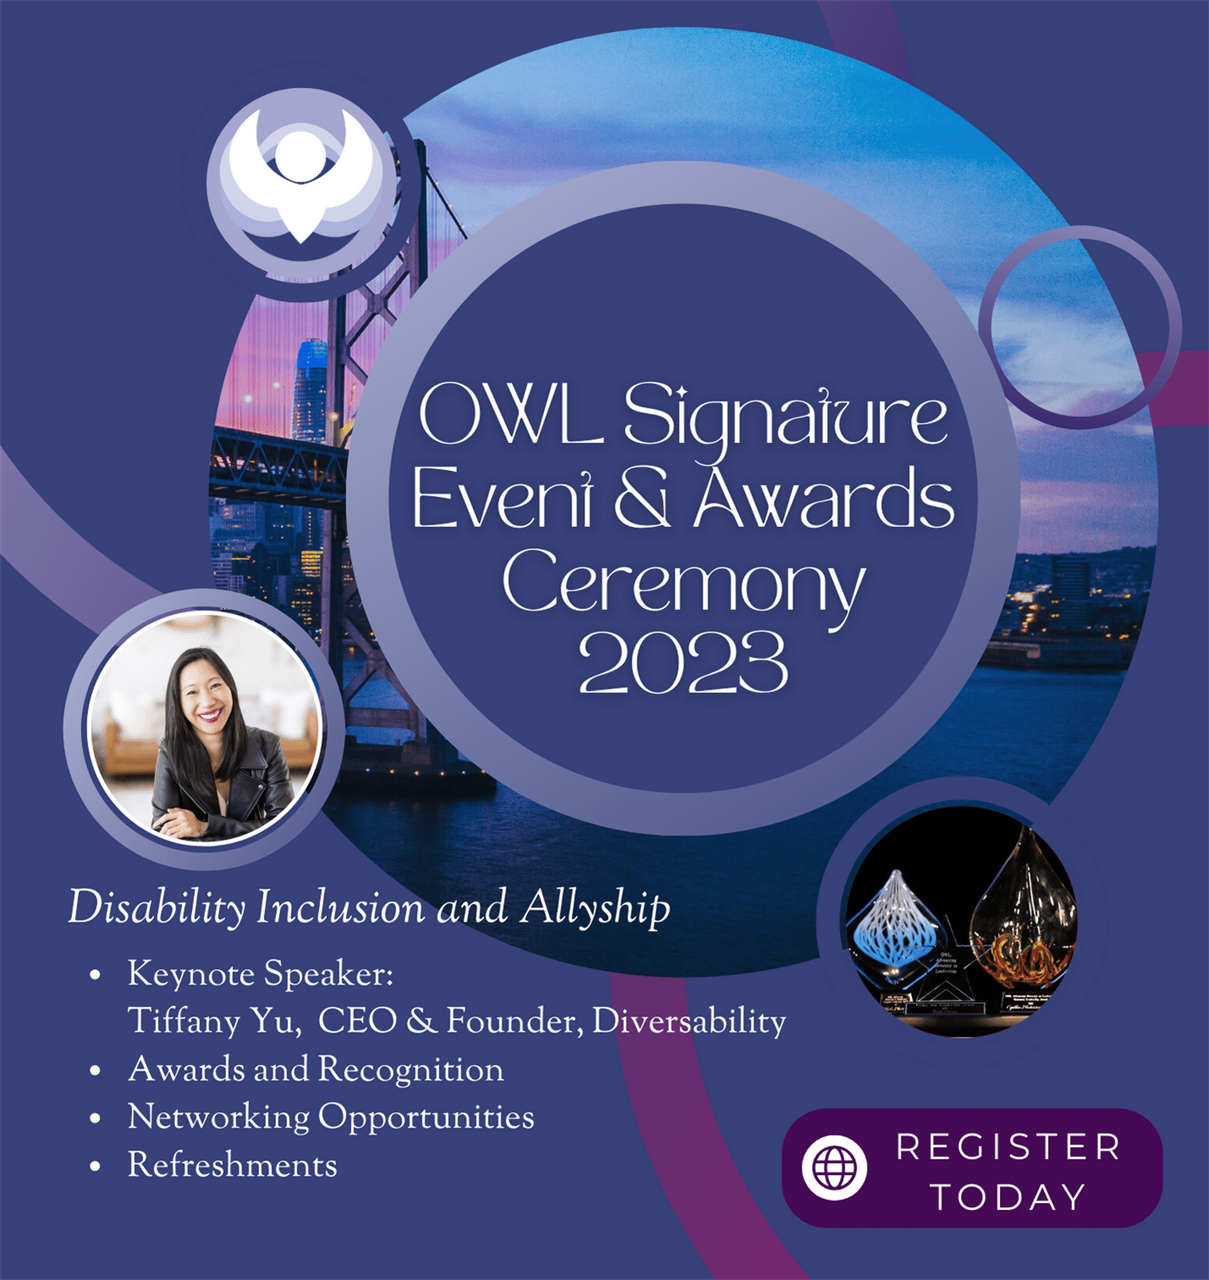 Click to register! OWL Signature Event and Awards Ceremony 2023 w/ Keynote Speaker: Tiffany Yu; Keynote Address: “Disability Inclusion and Allyship”